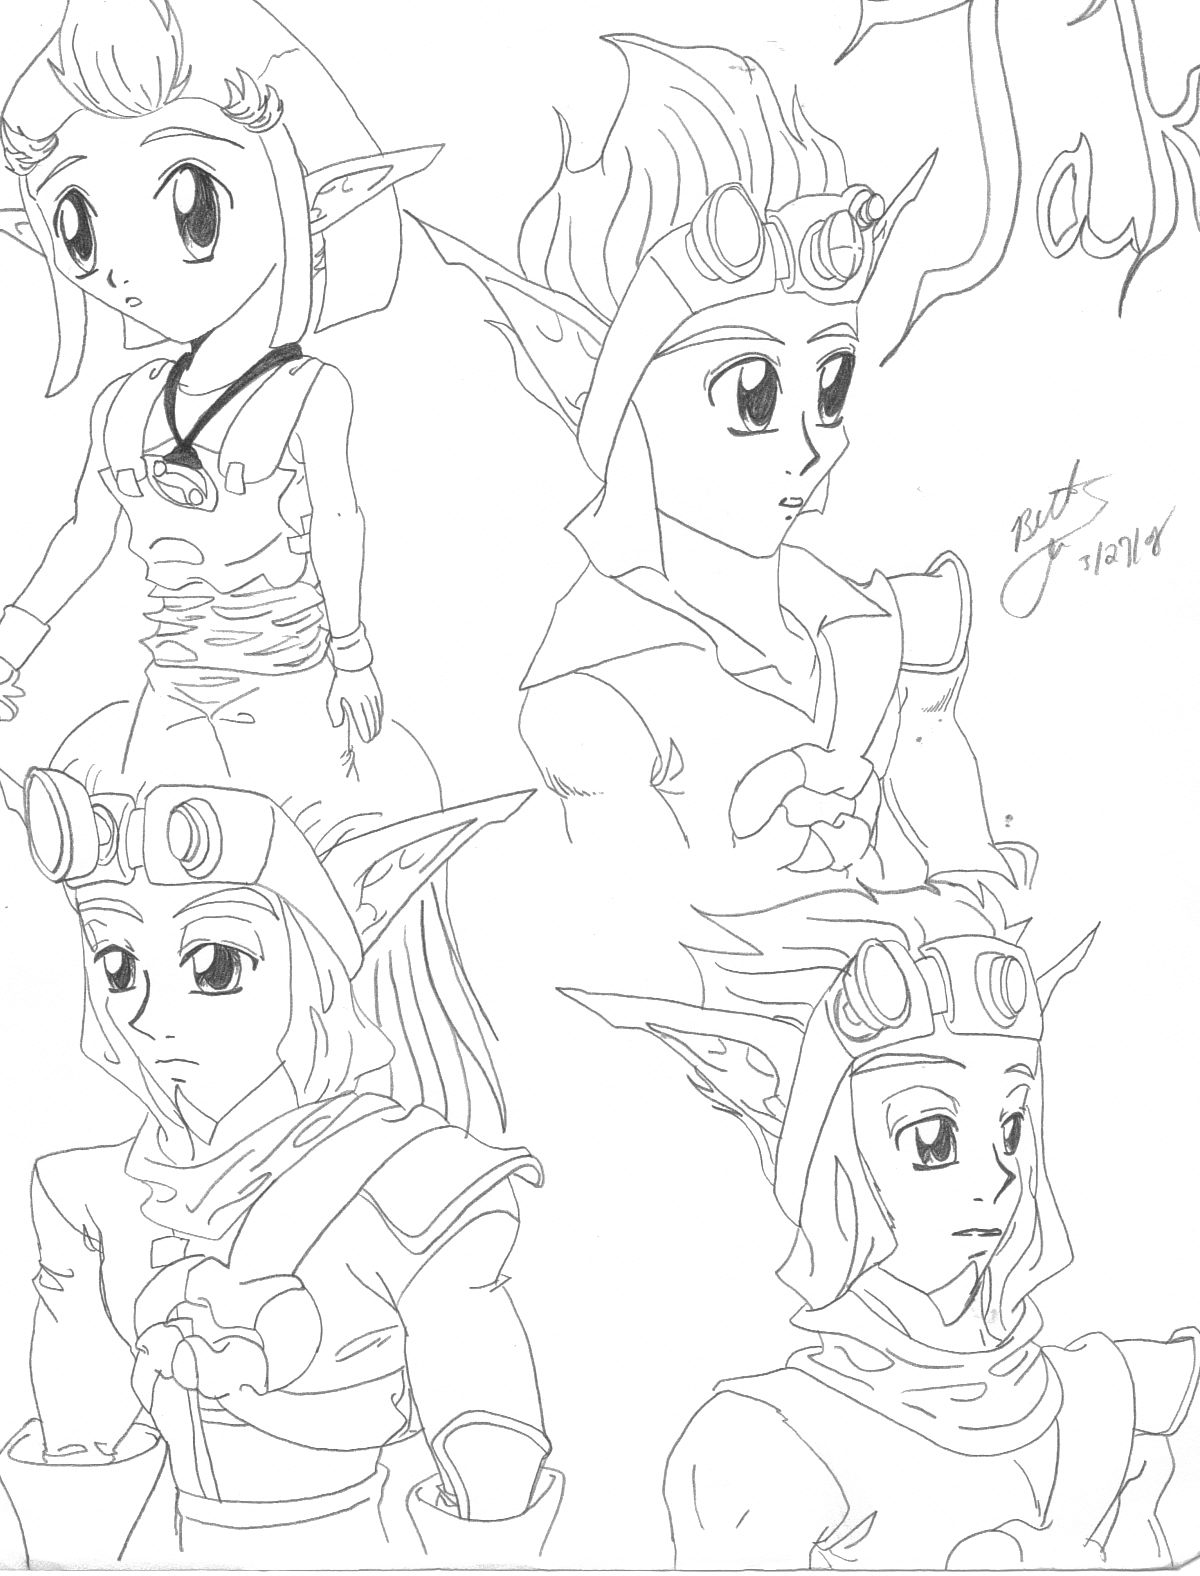 Jak Throughout the Years by ThebSayraduka